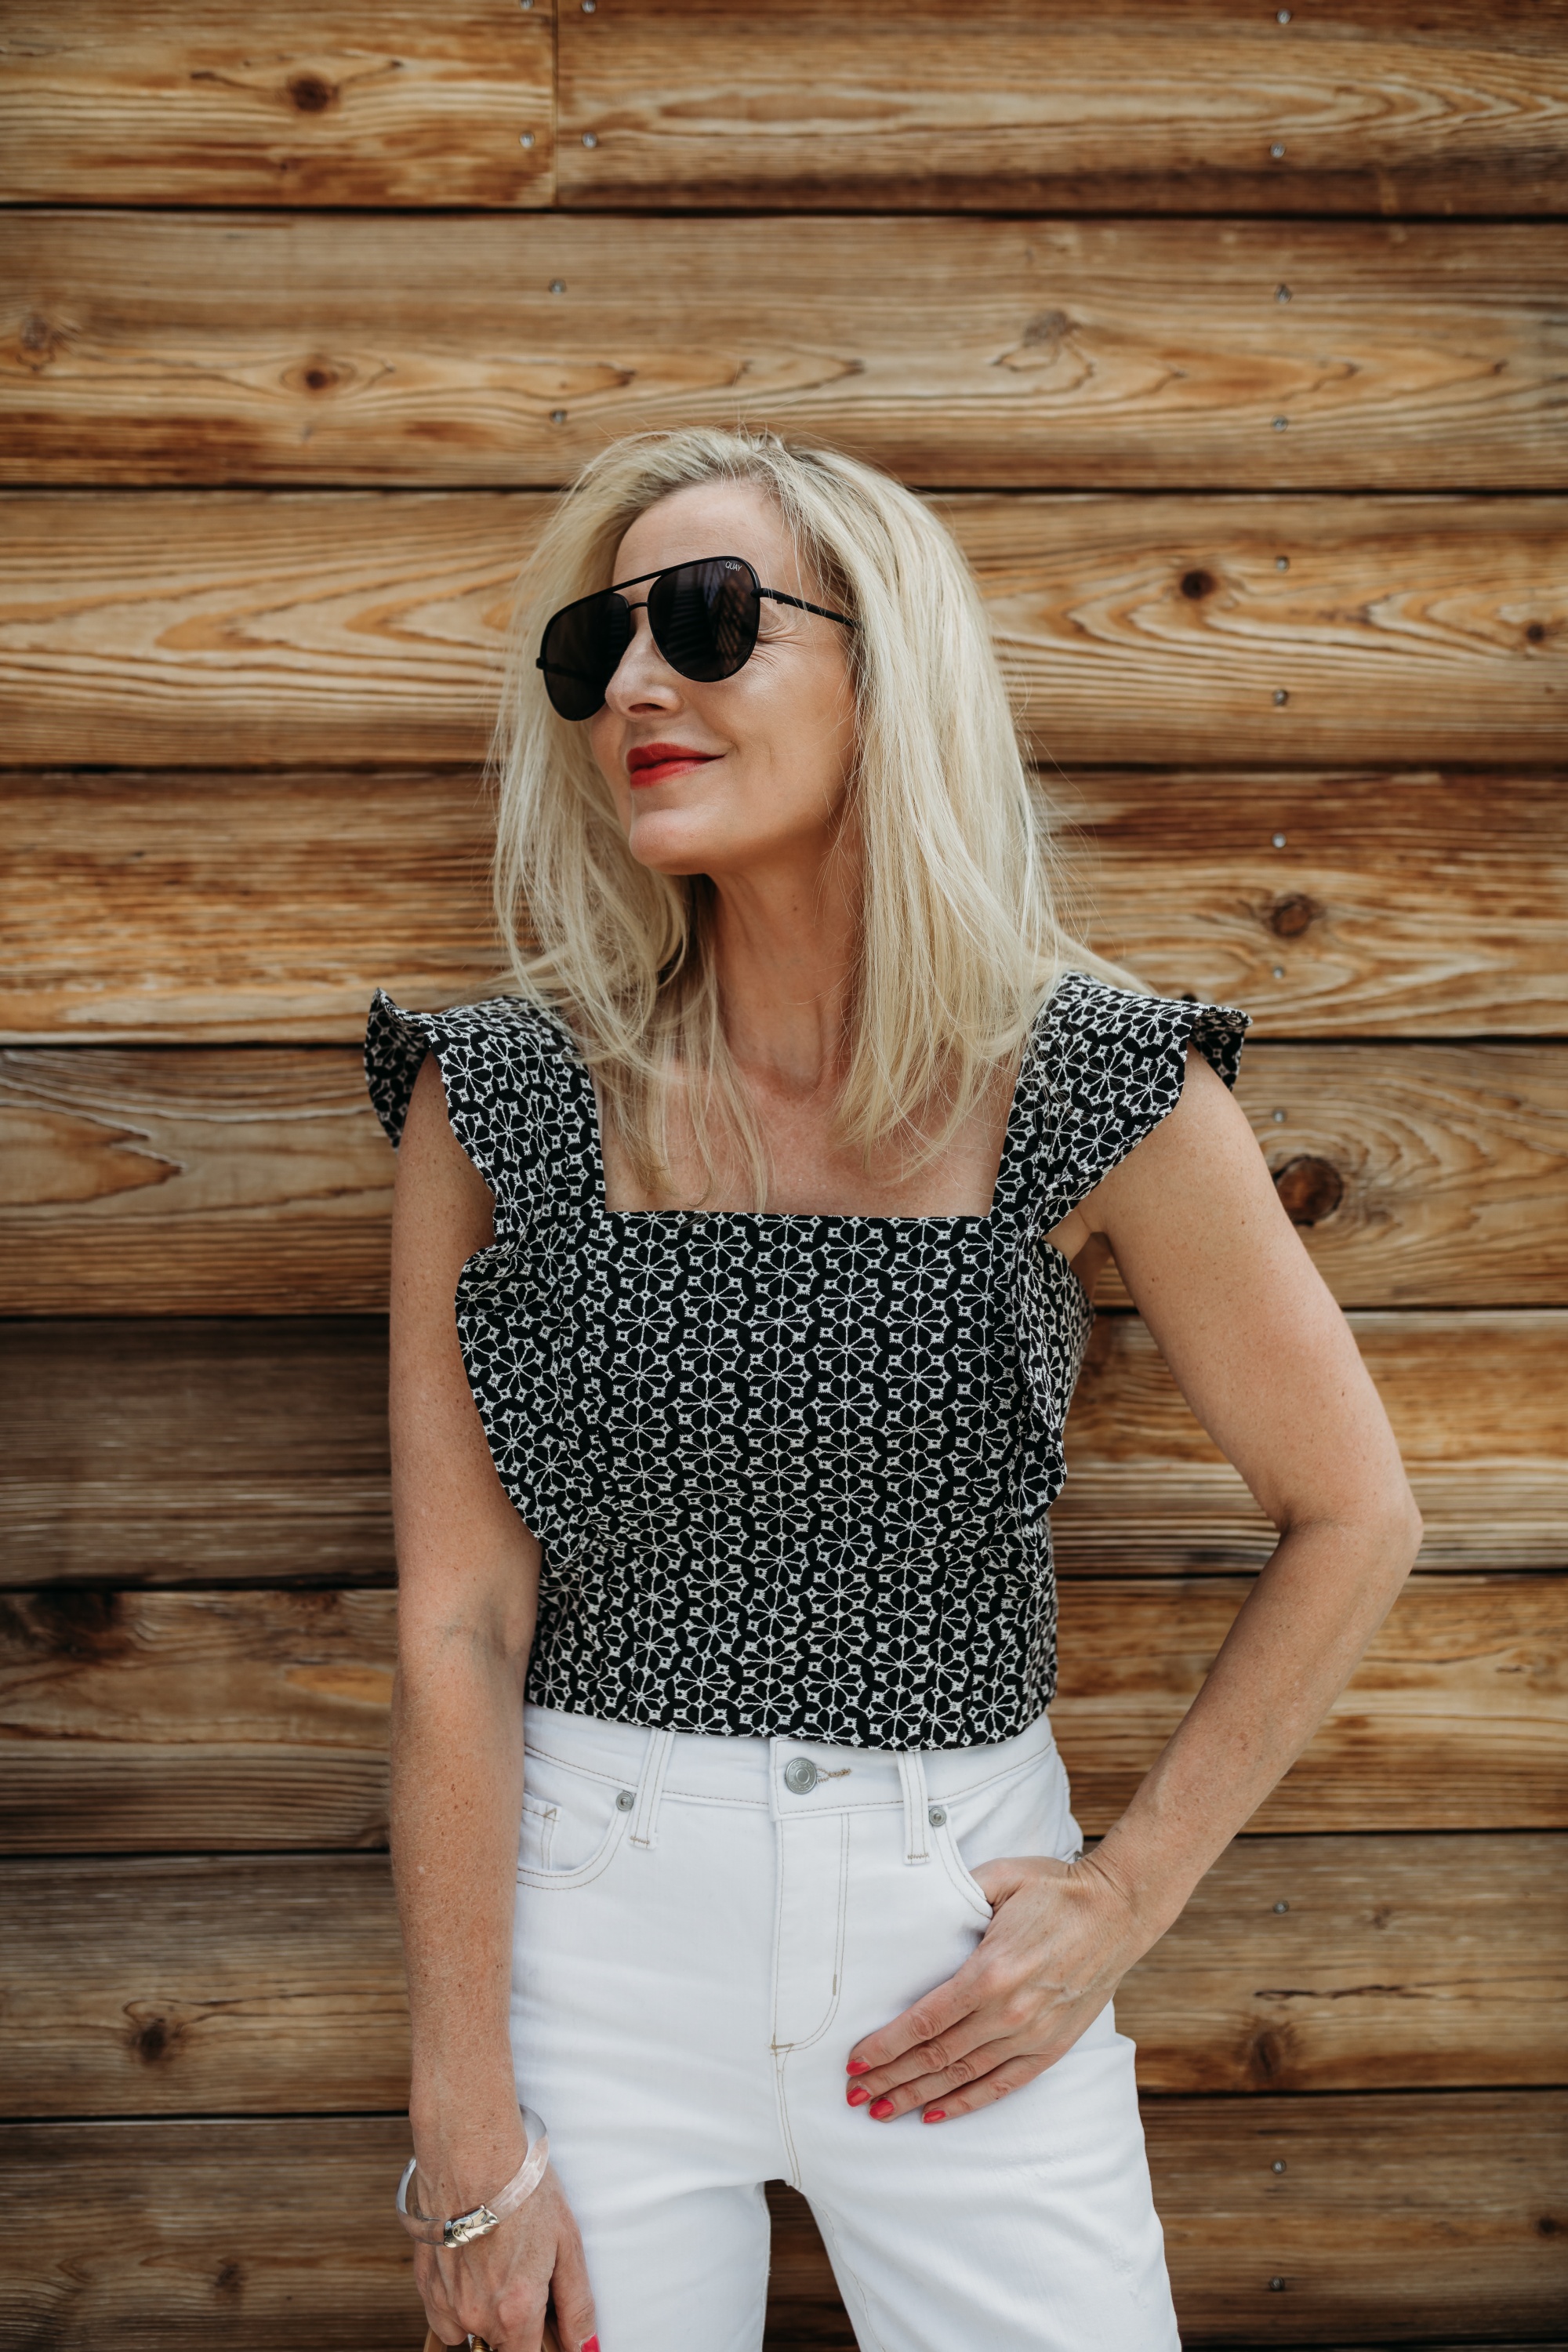 fashion blogger over 40 showing how to style a crop top over age 40 in age appropriate outfit